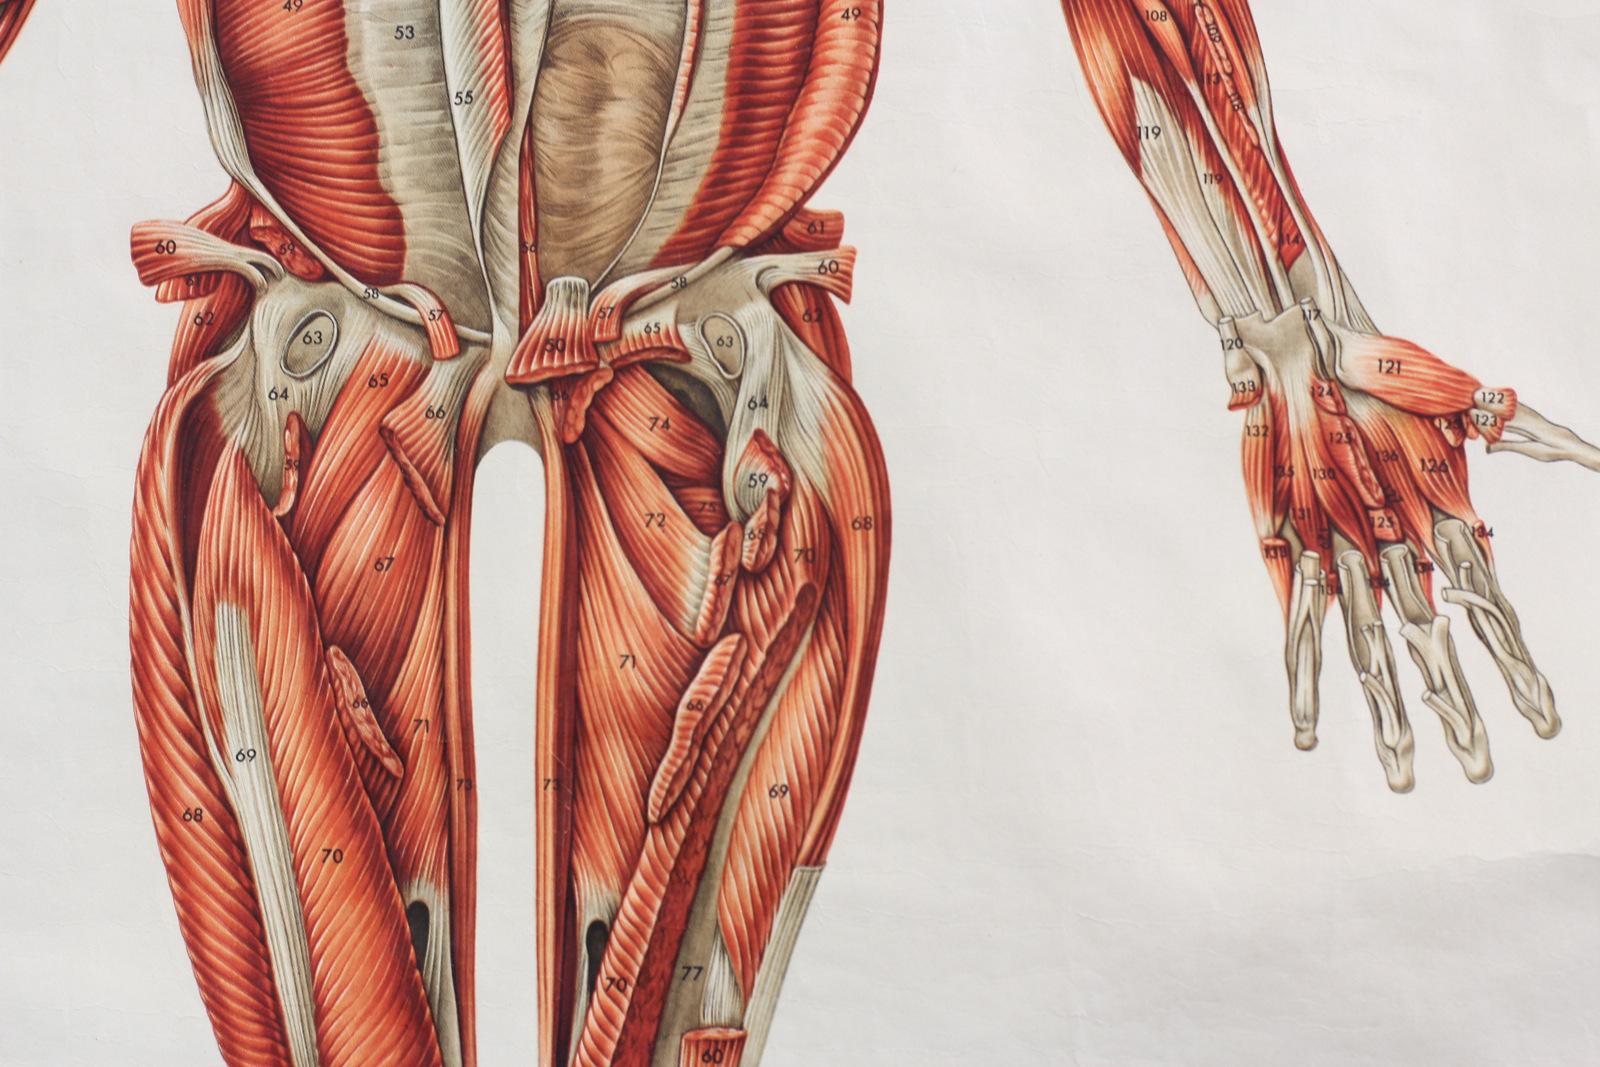 German Anatomical Wall Chart of the Muscles, circa 1960s